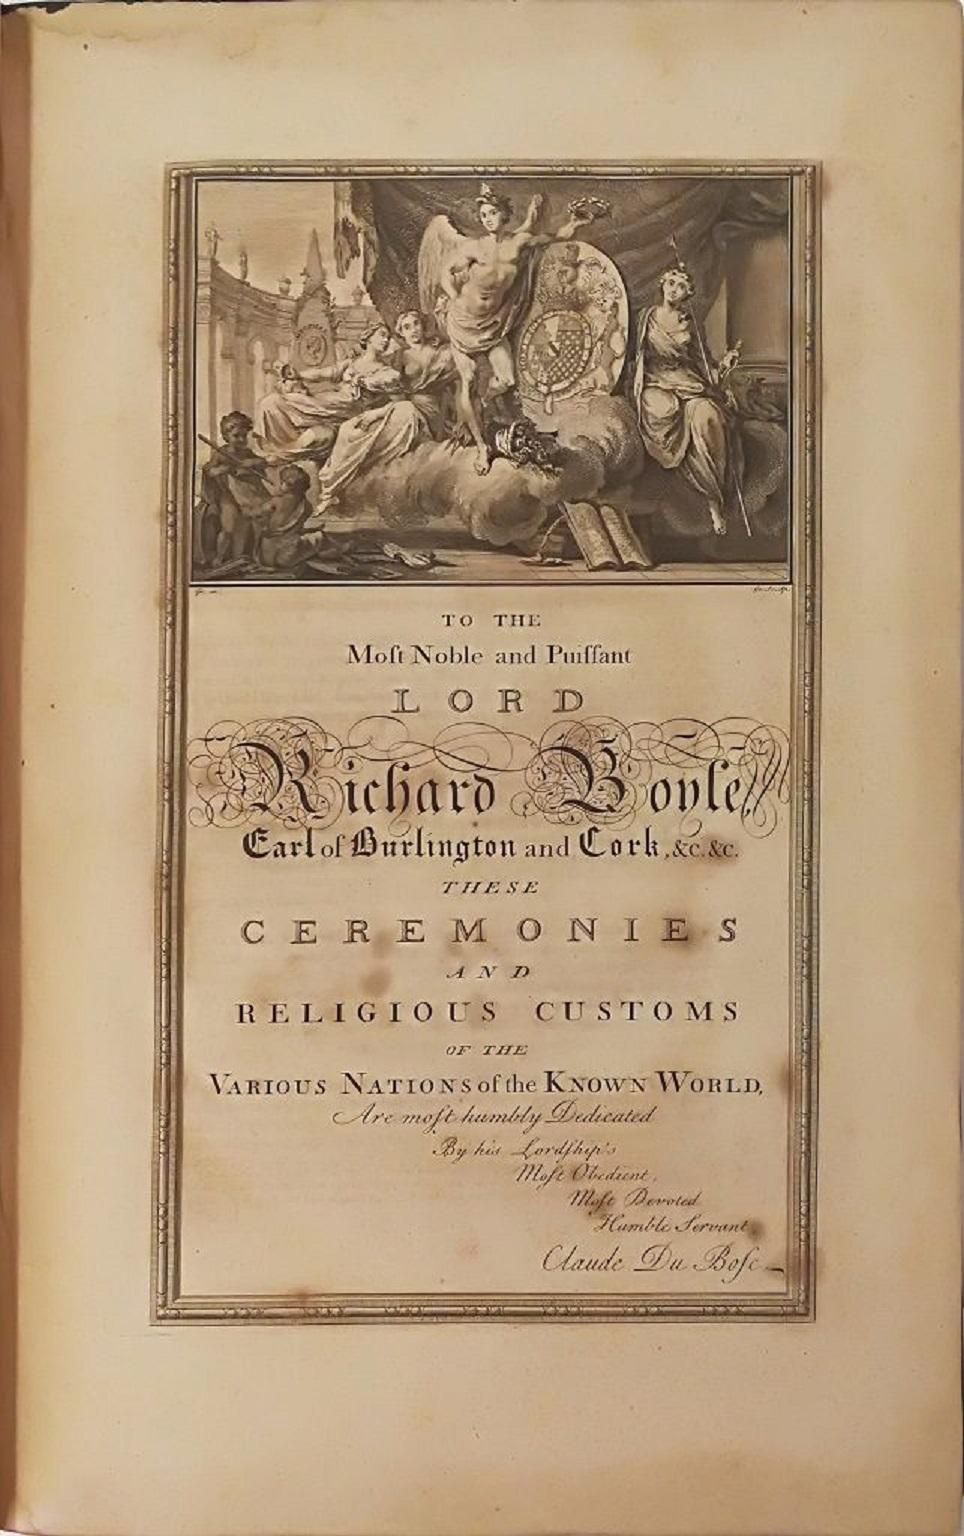 The Ceremonies and Religious Customs of the Various Nations of the Known World - Print by Bernard Picart